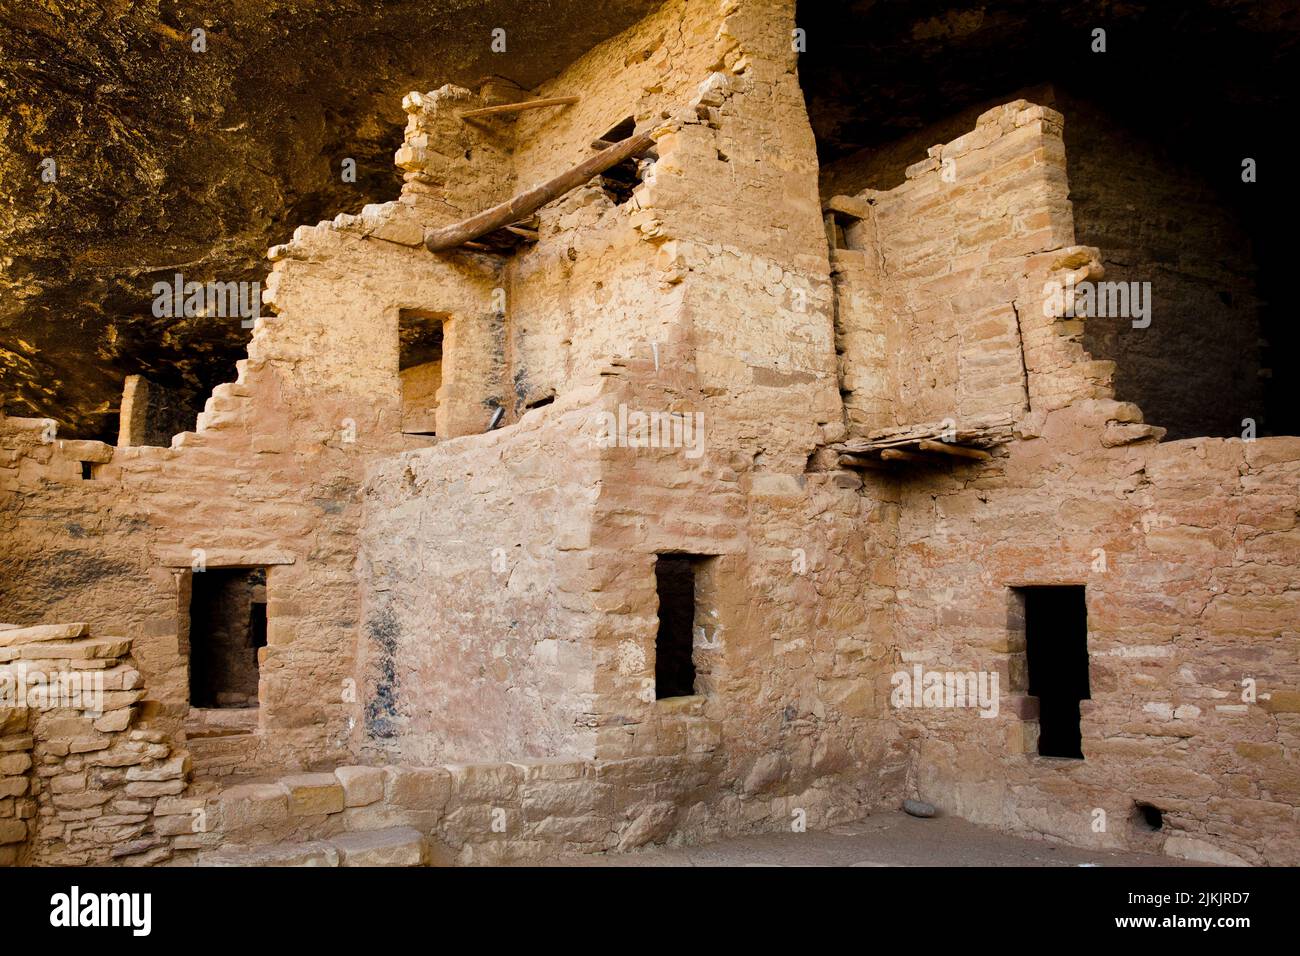 Anasazi Culture built the Spruce Tree House adobe ruins located in Mesa Verde National Park on the Colorado Plateau, CO. Stock Photo